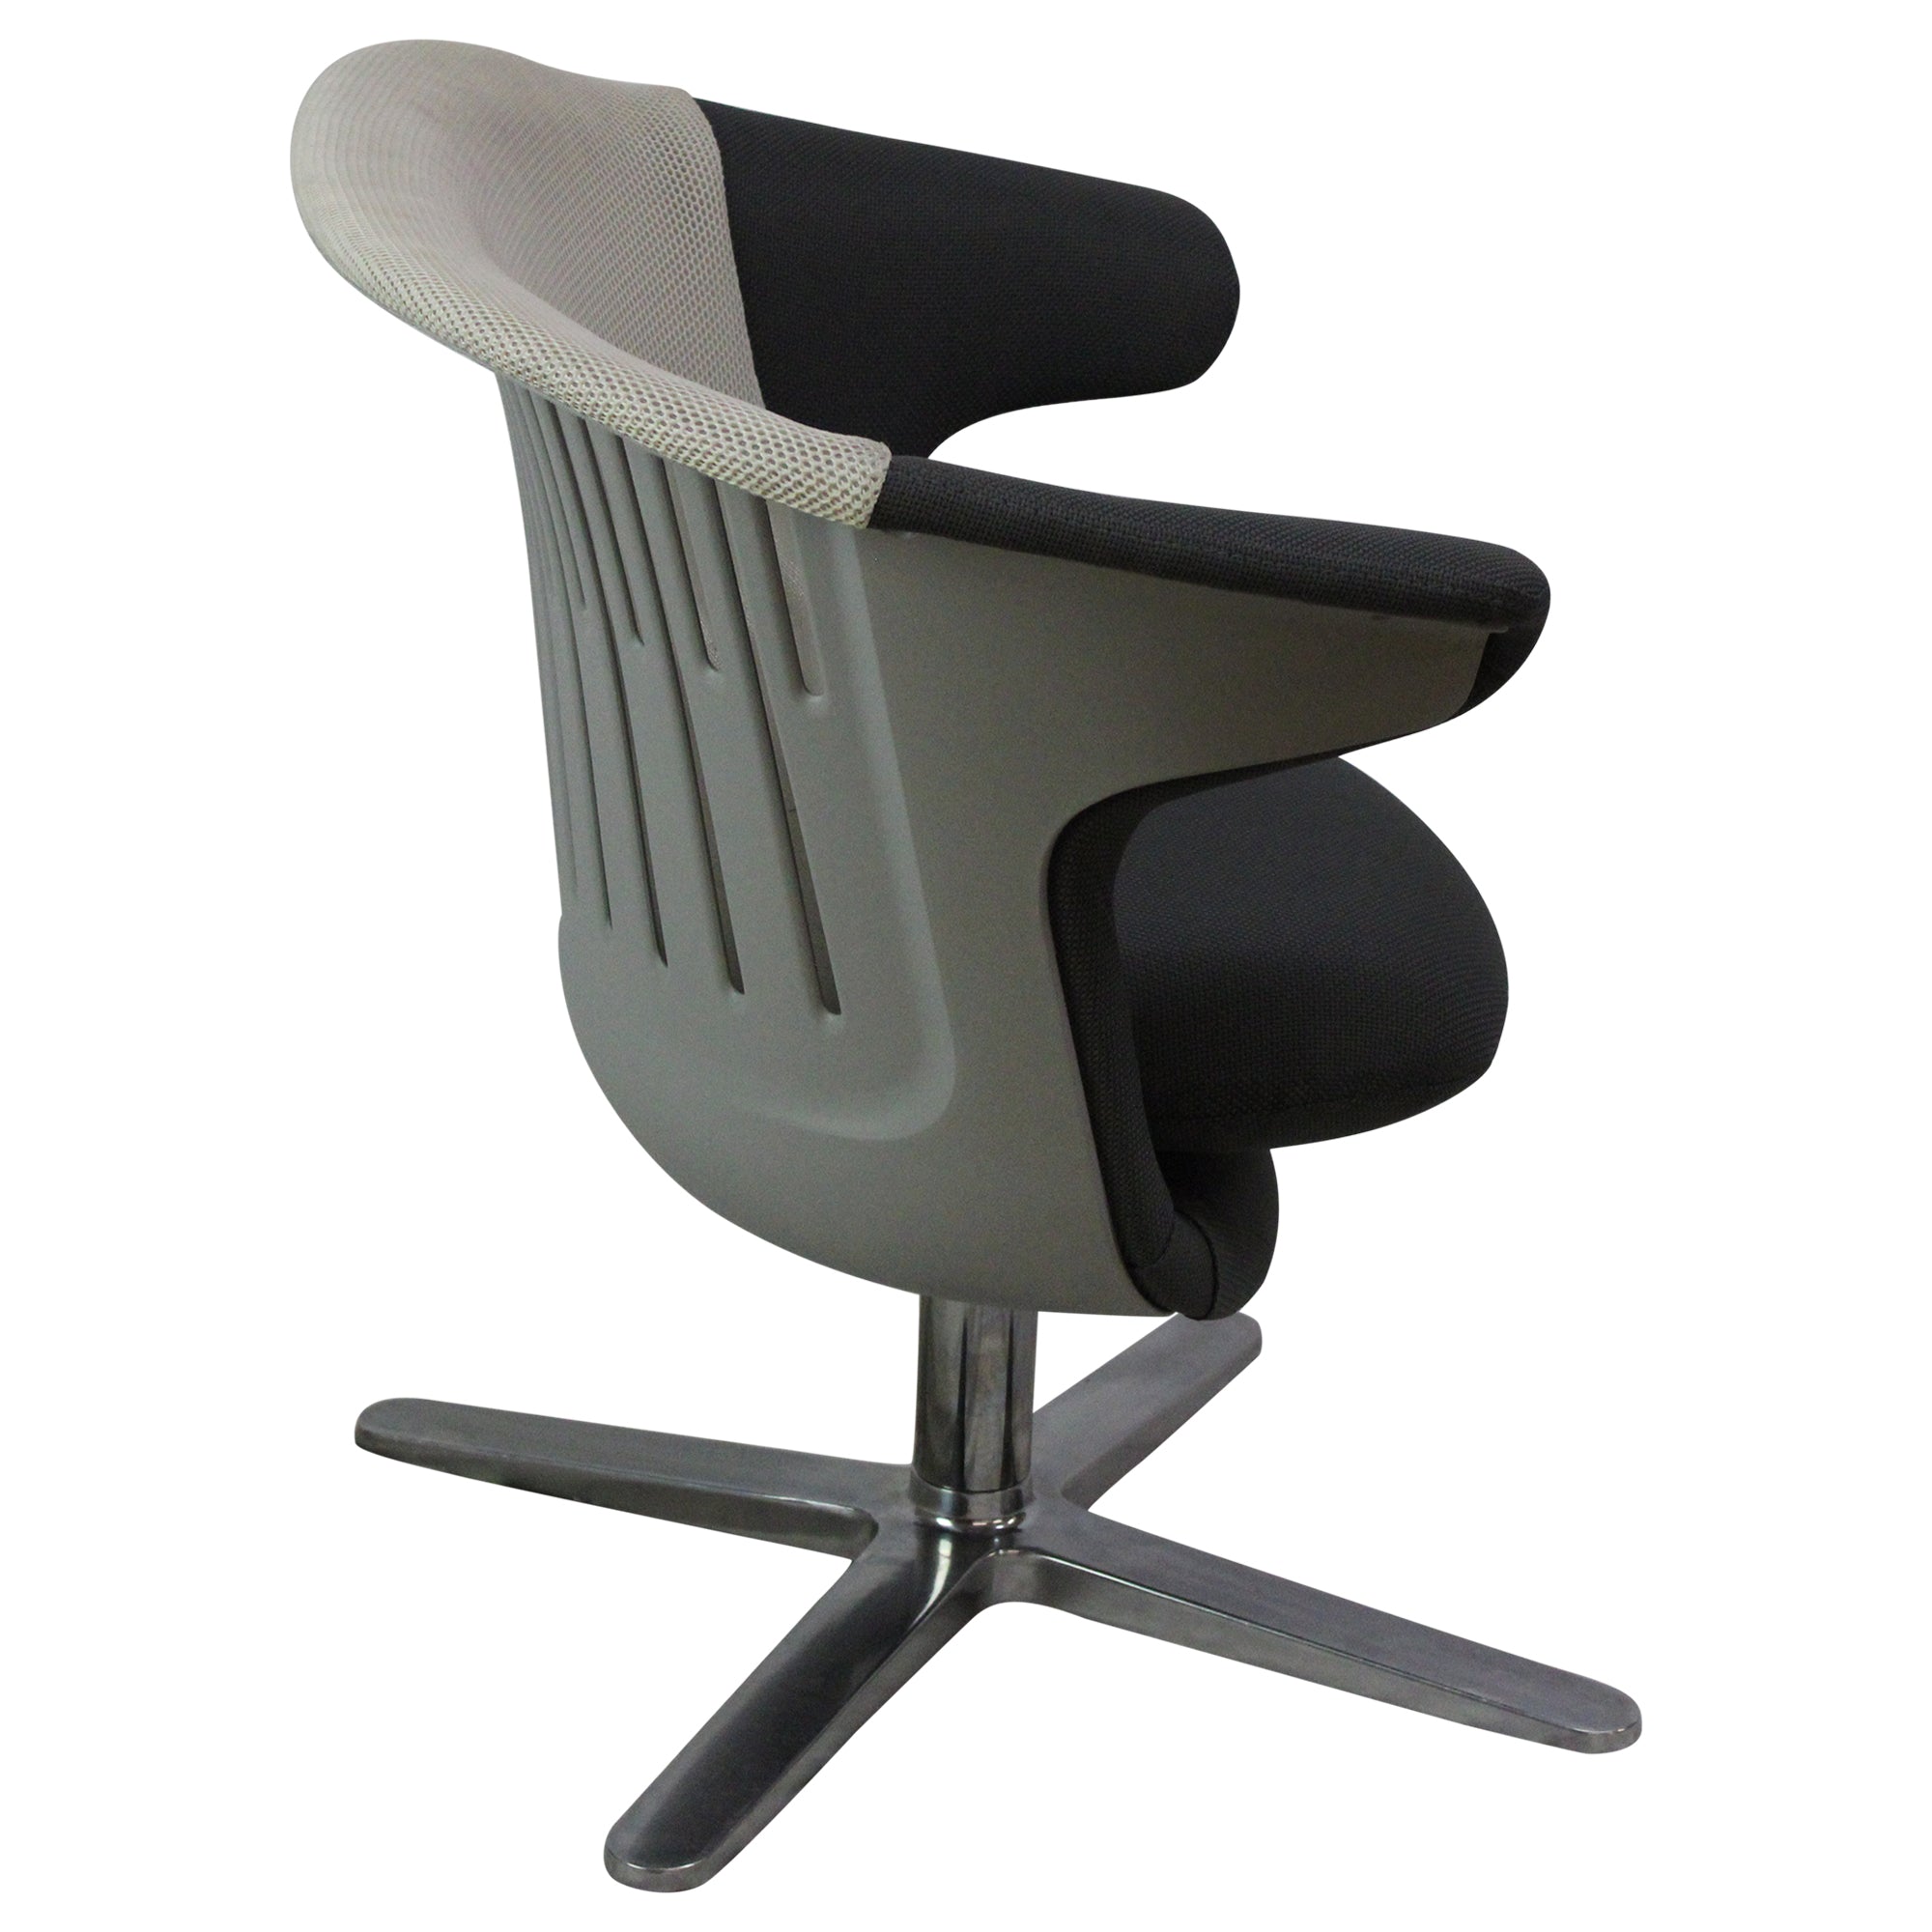 Steelcase i2i Chair - Grey -  Preowned